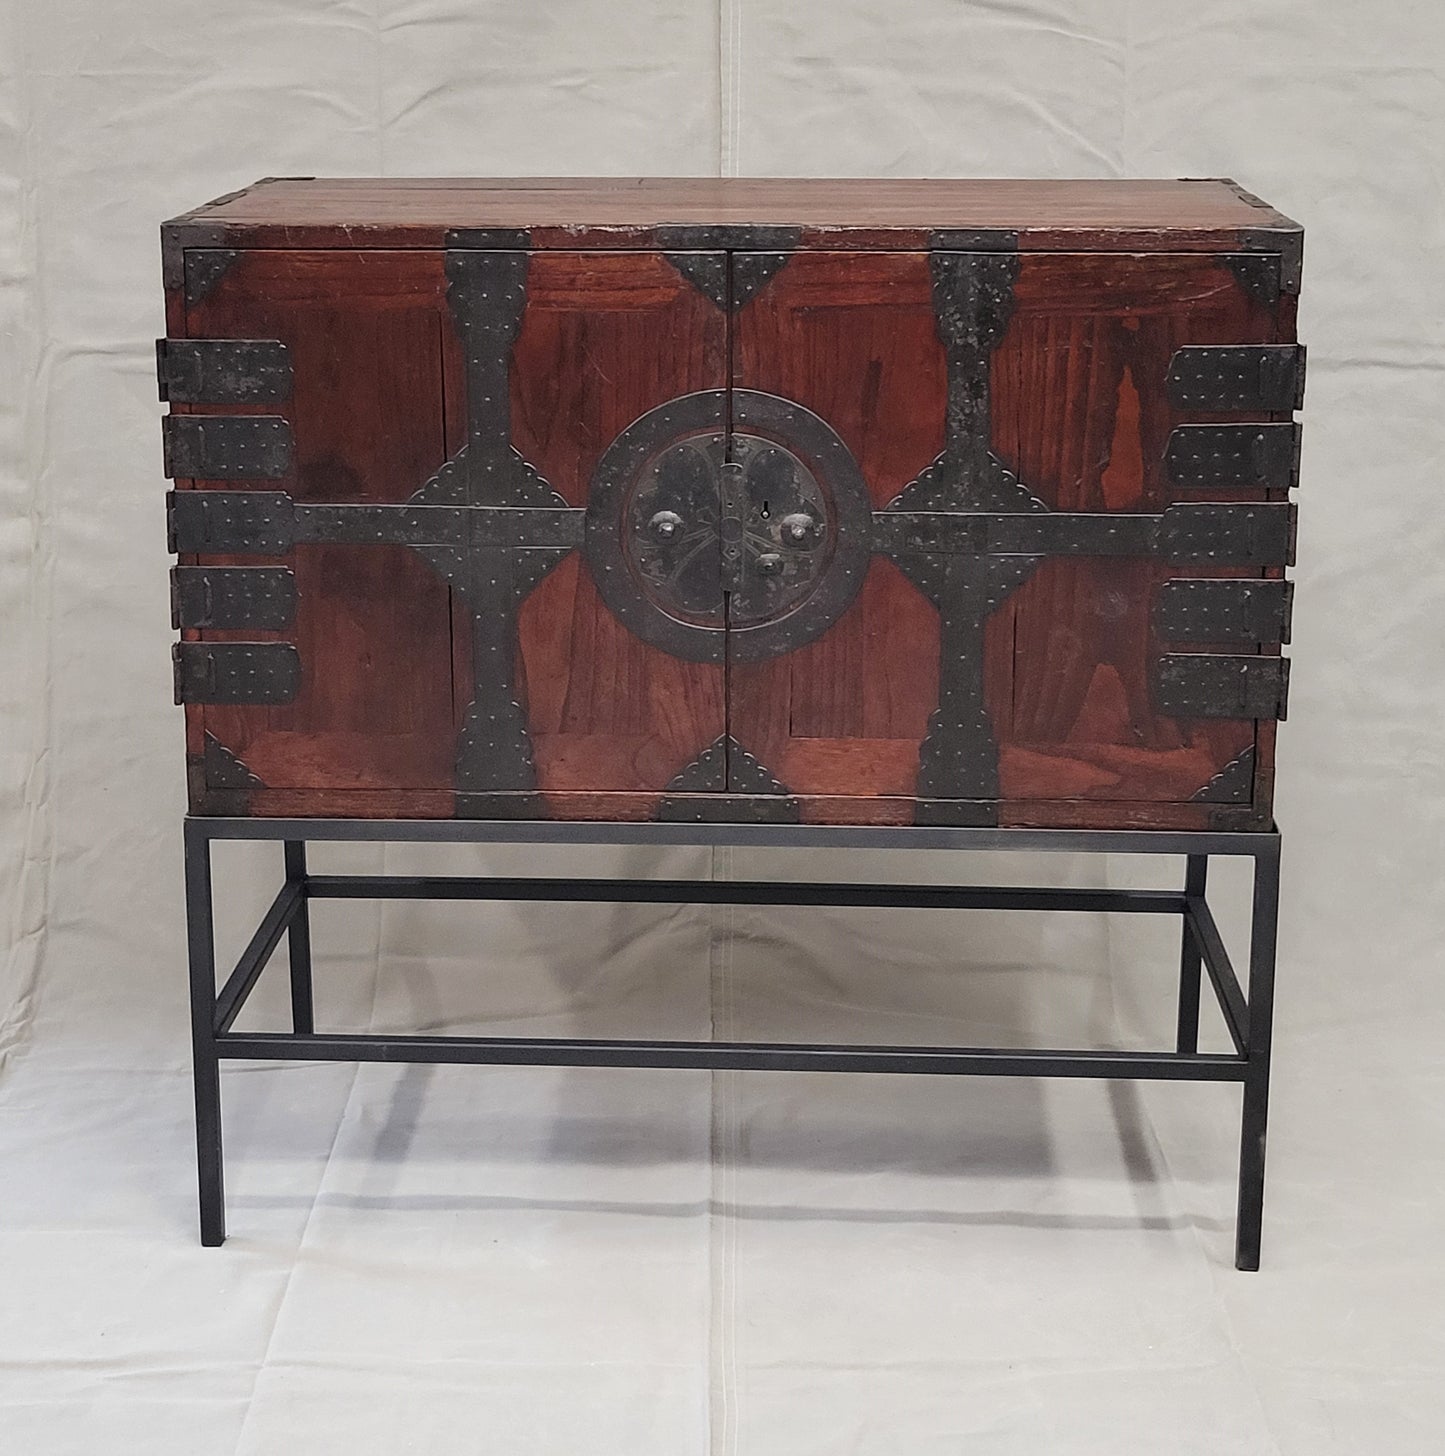 Antique Japanese Tansu Chest With Drawers on Contemporary Metal Stand